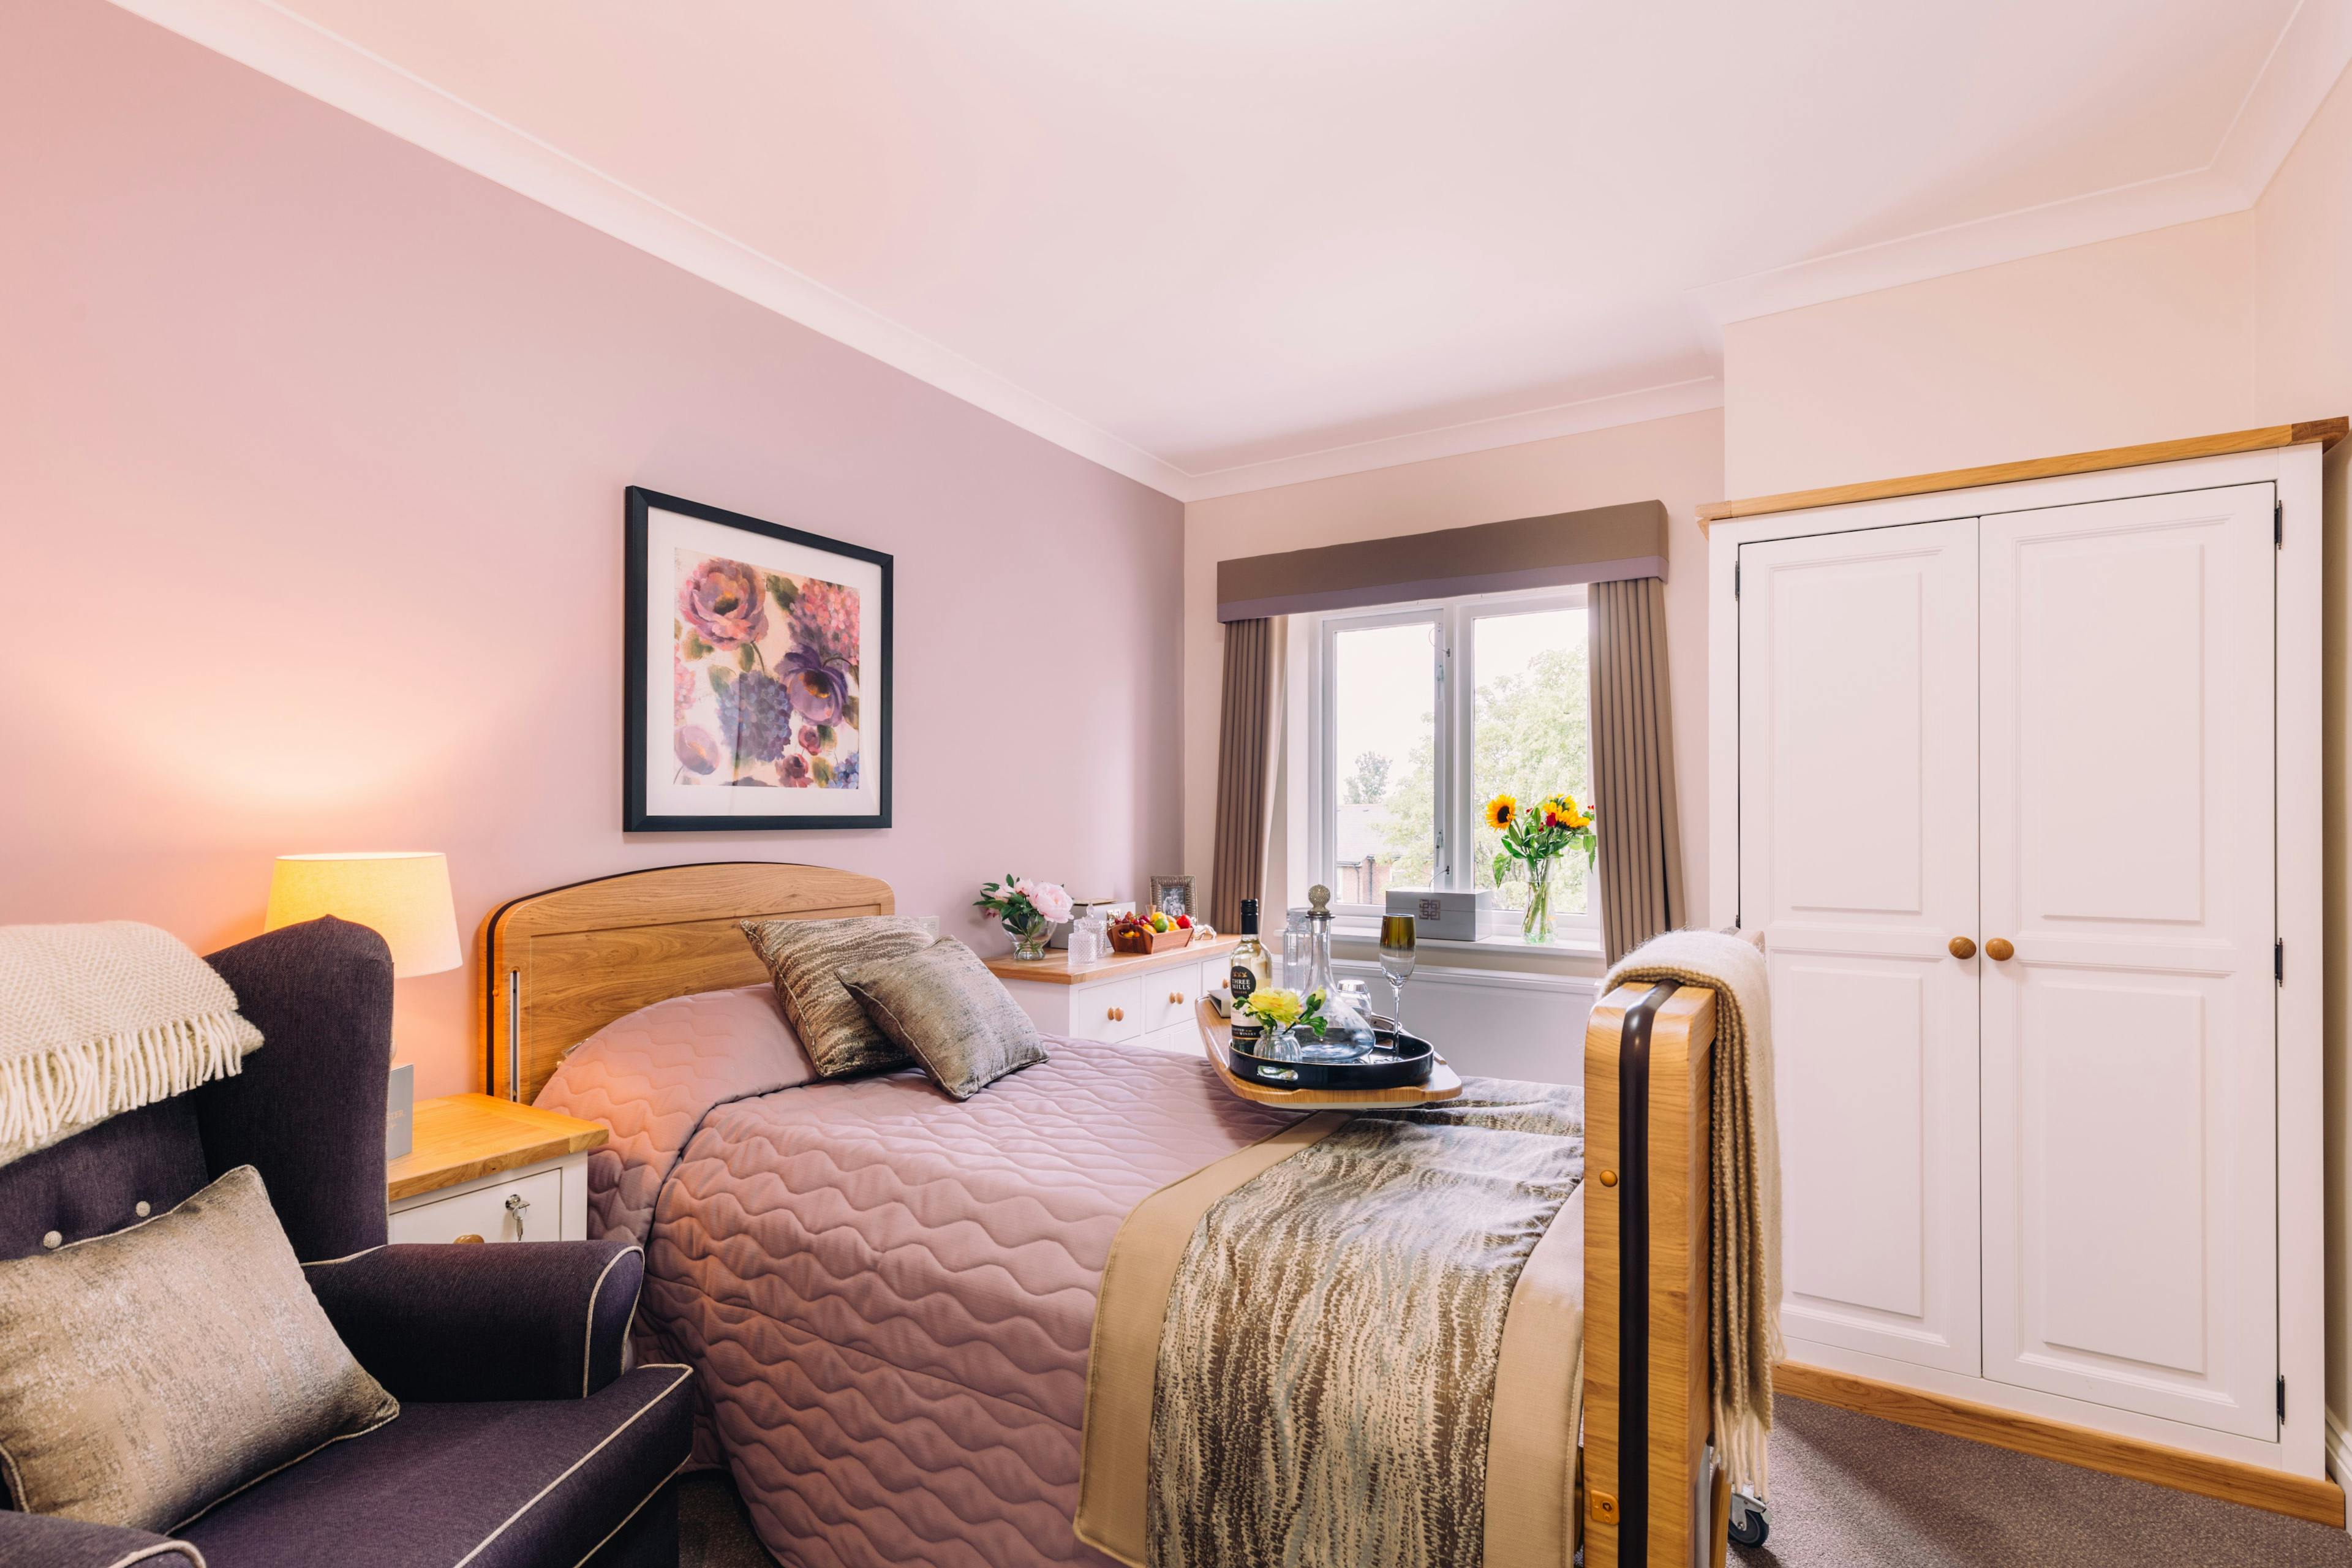 Bedroom at Peony Court Care Home in Croydon, Greater London